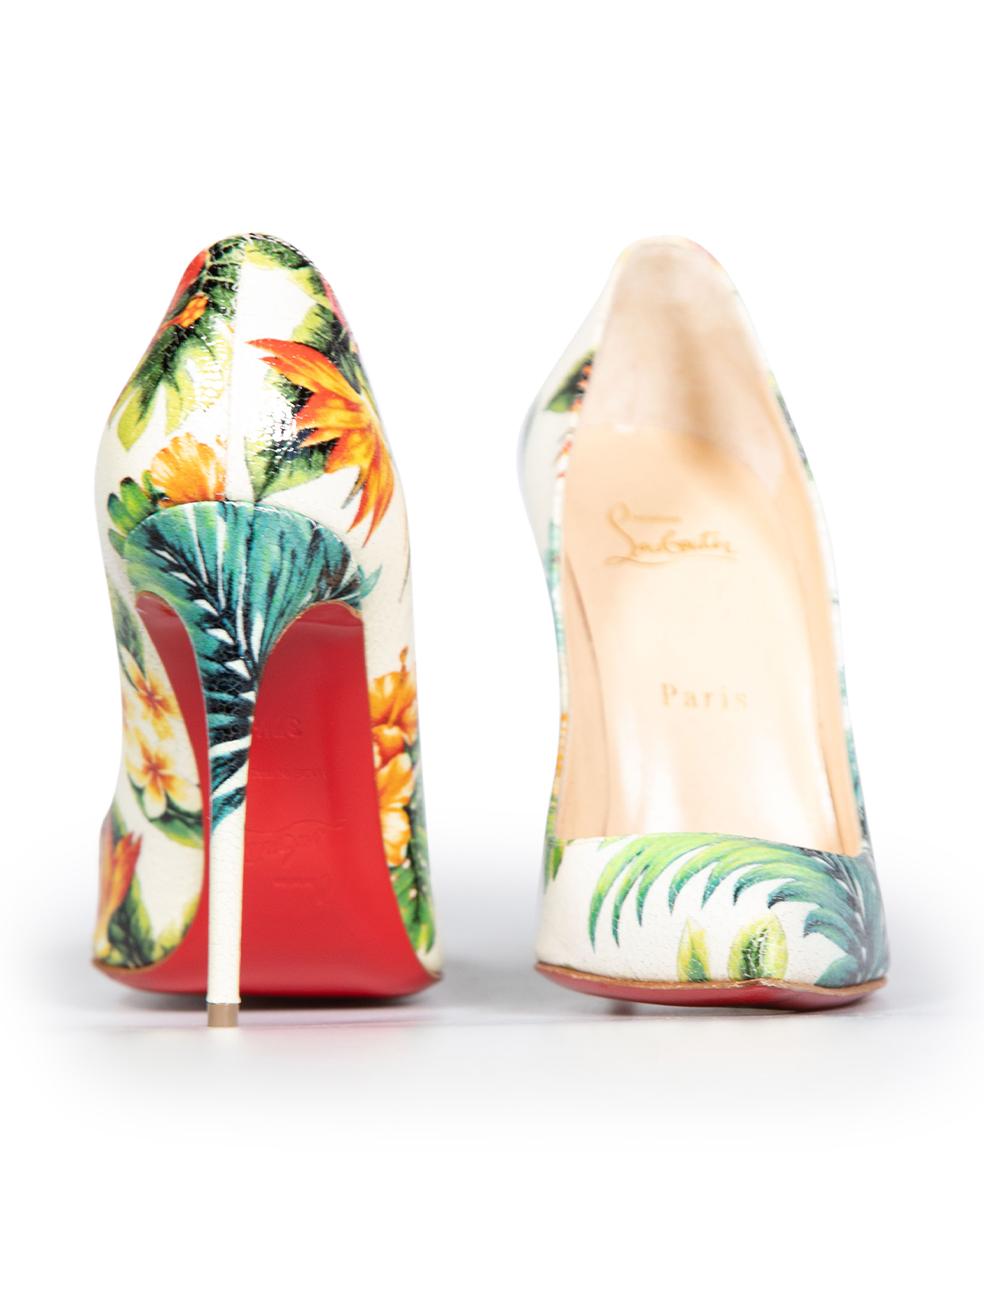 Christian Louboutin Hawaii Floral Print Pigalle Follies Pumps Size IT 37.5 In Good Condition For Sale In London, GB